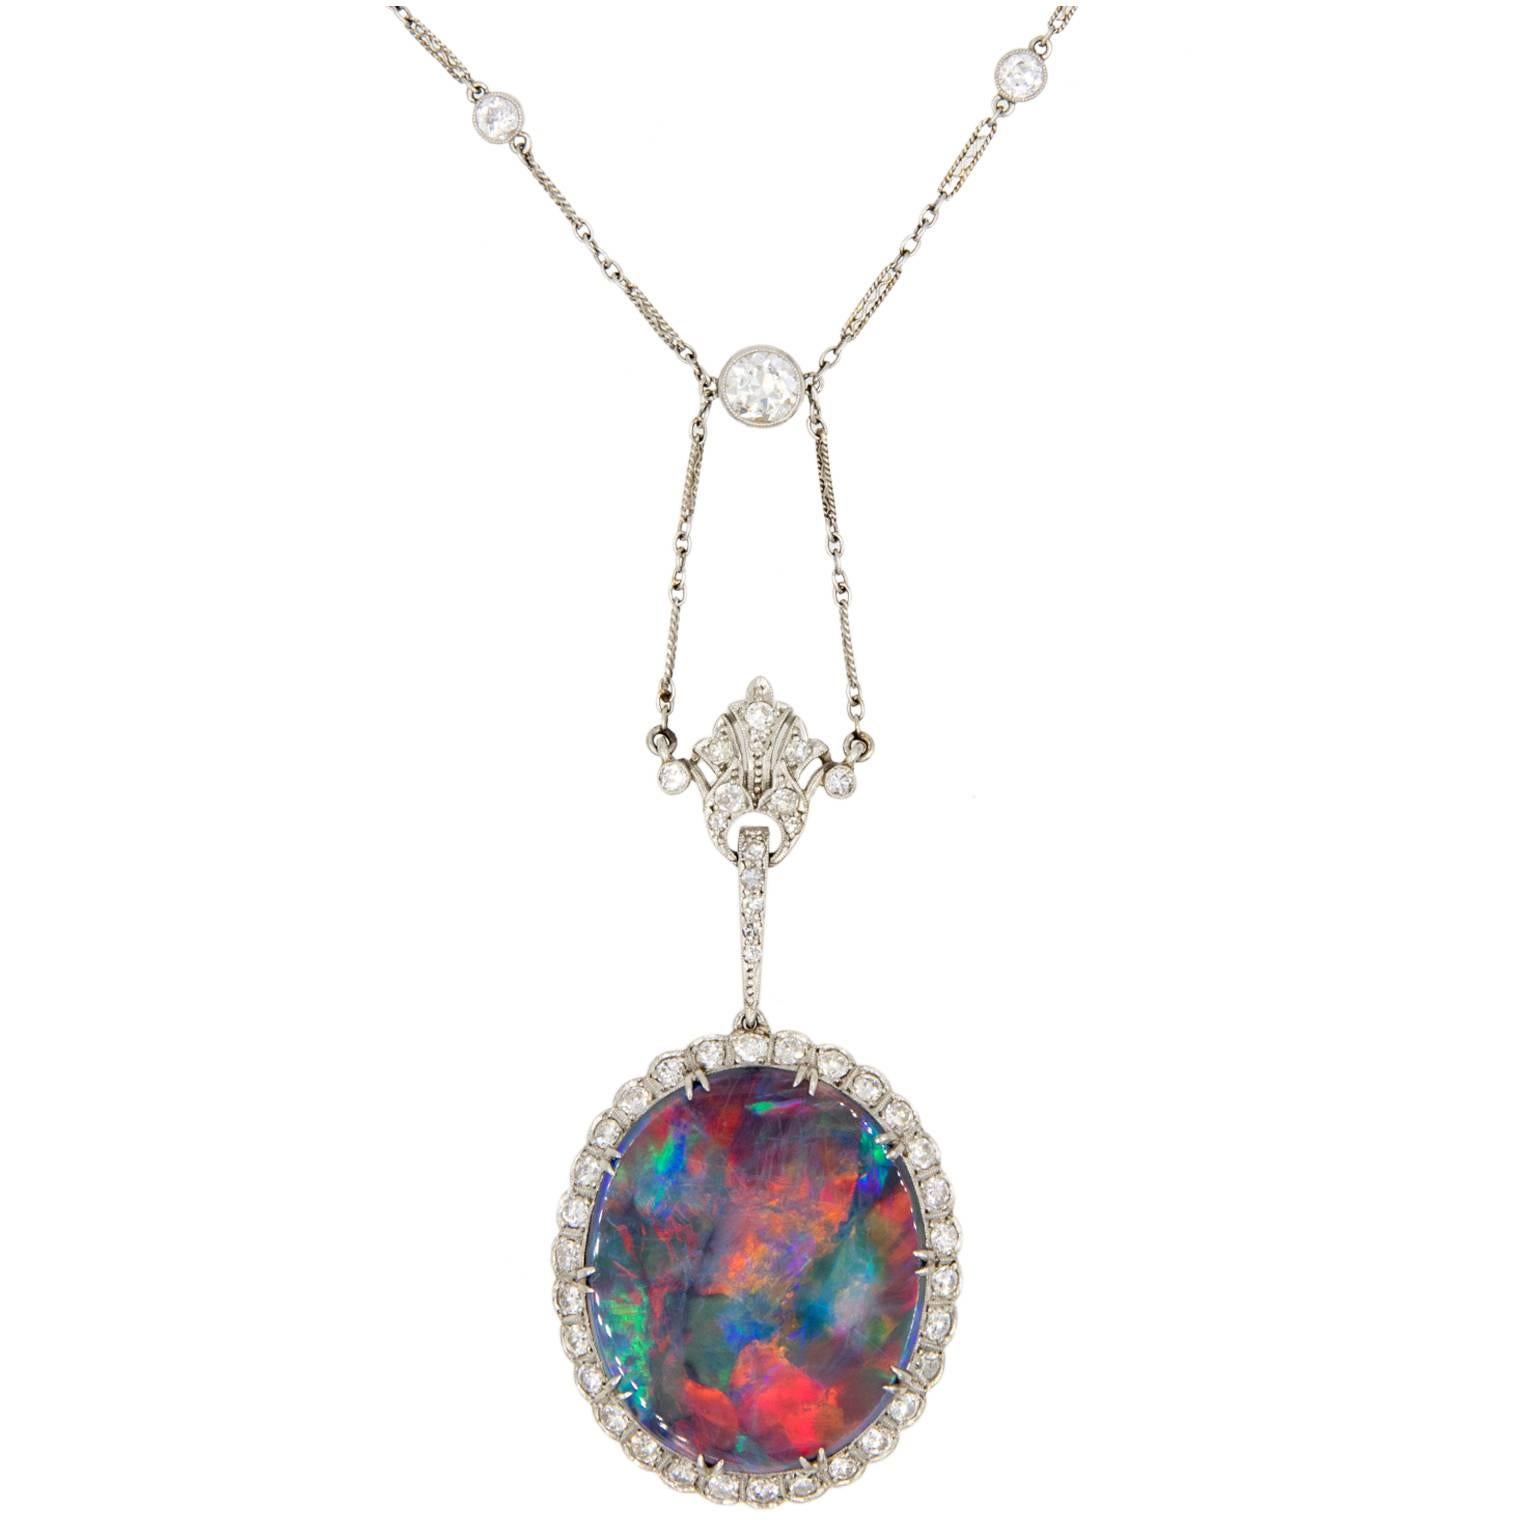  One-of-a-kind period necklace for opal aficionados and Edwardian period collectors alike.   A spectacular Lightning Ridge black opal weighing approximately 20 carats - this translates to 1